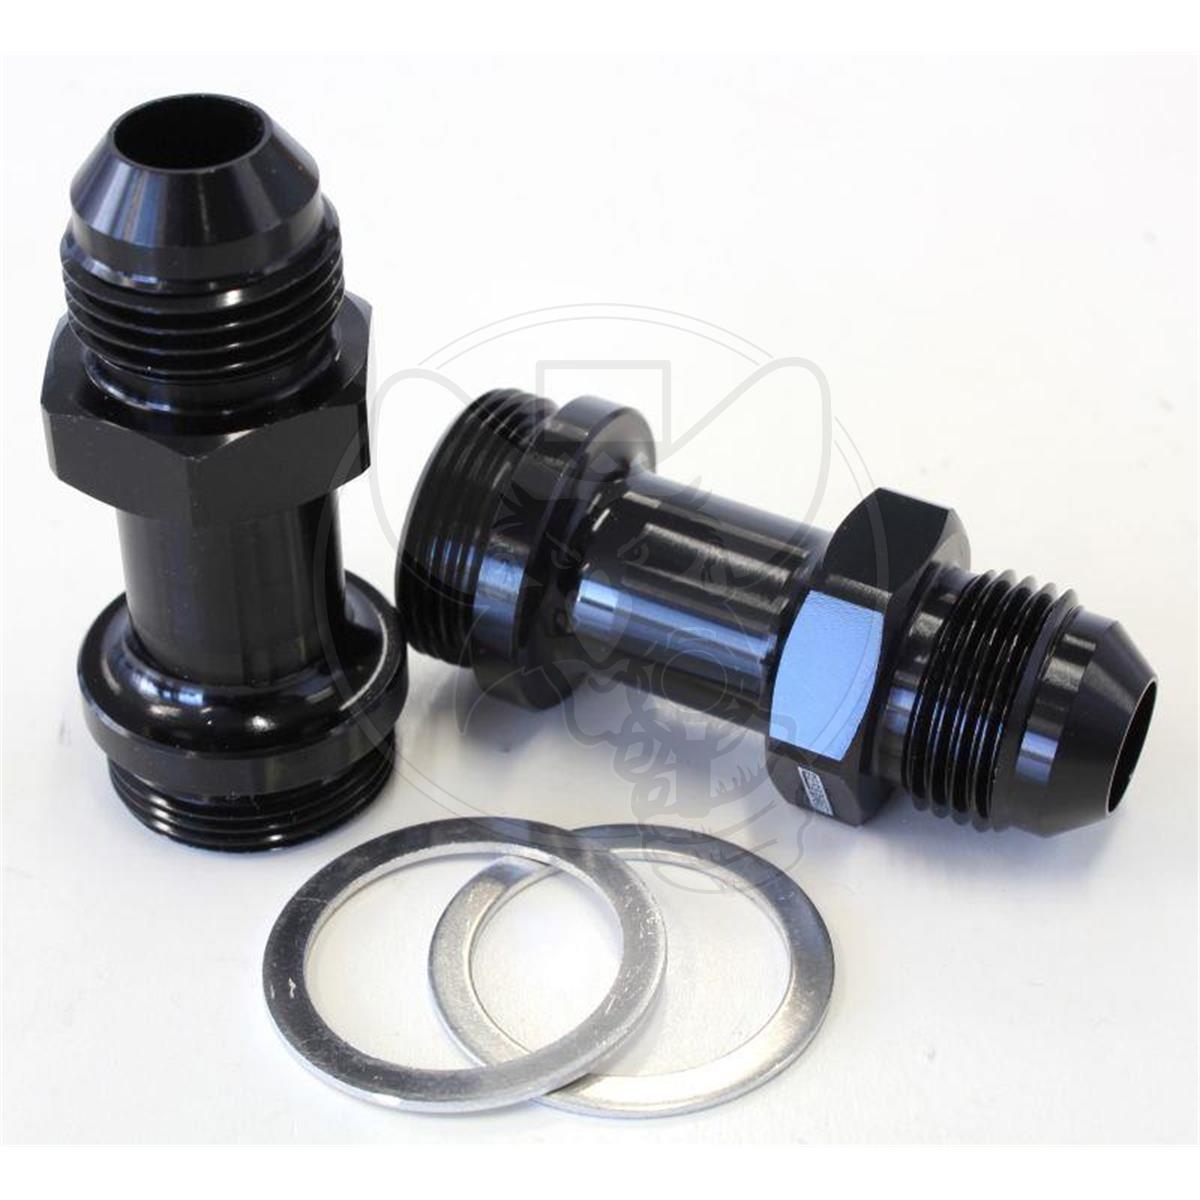 AEROFLOW INLET FITTINGS FITS HOLLEY CARBY LONG -8AN BLACK